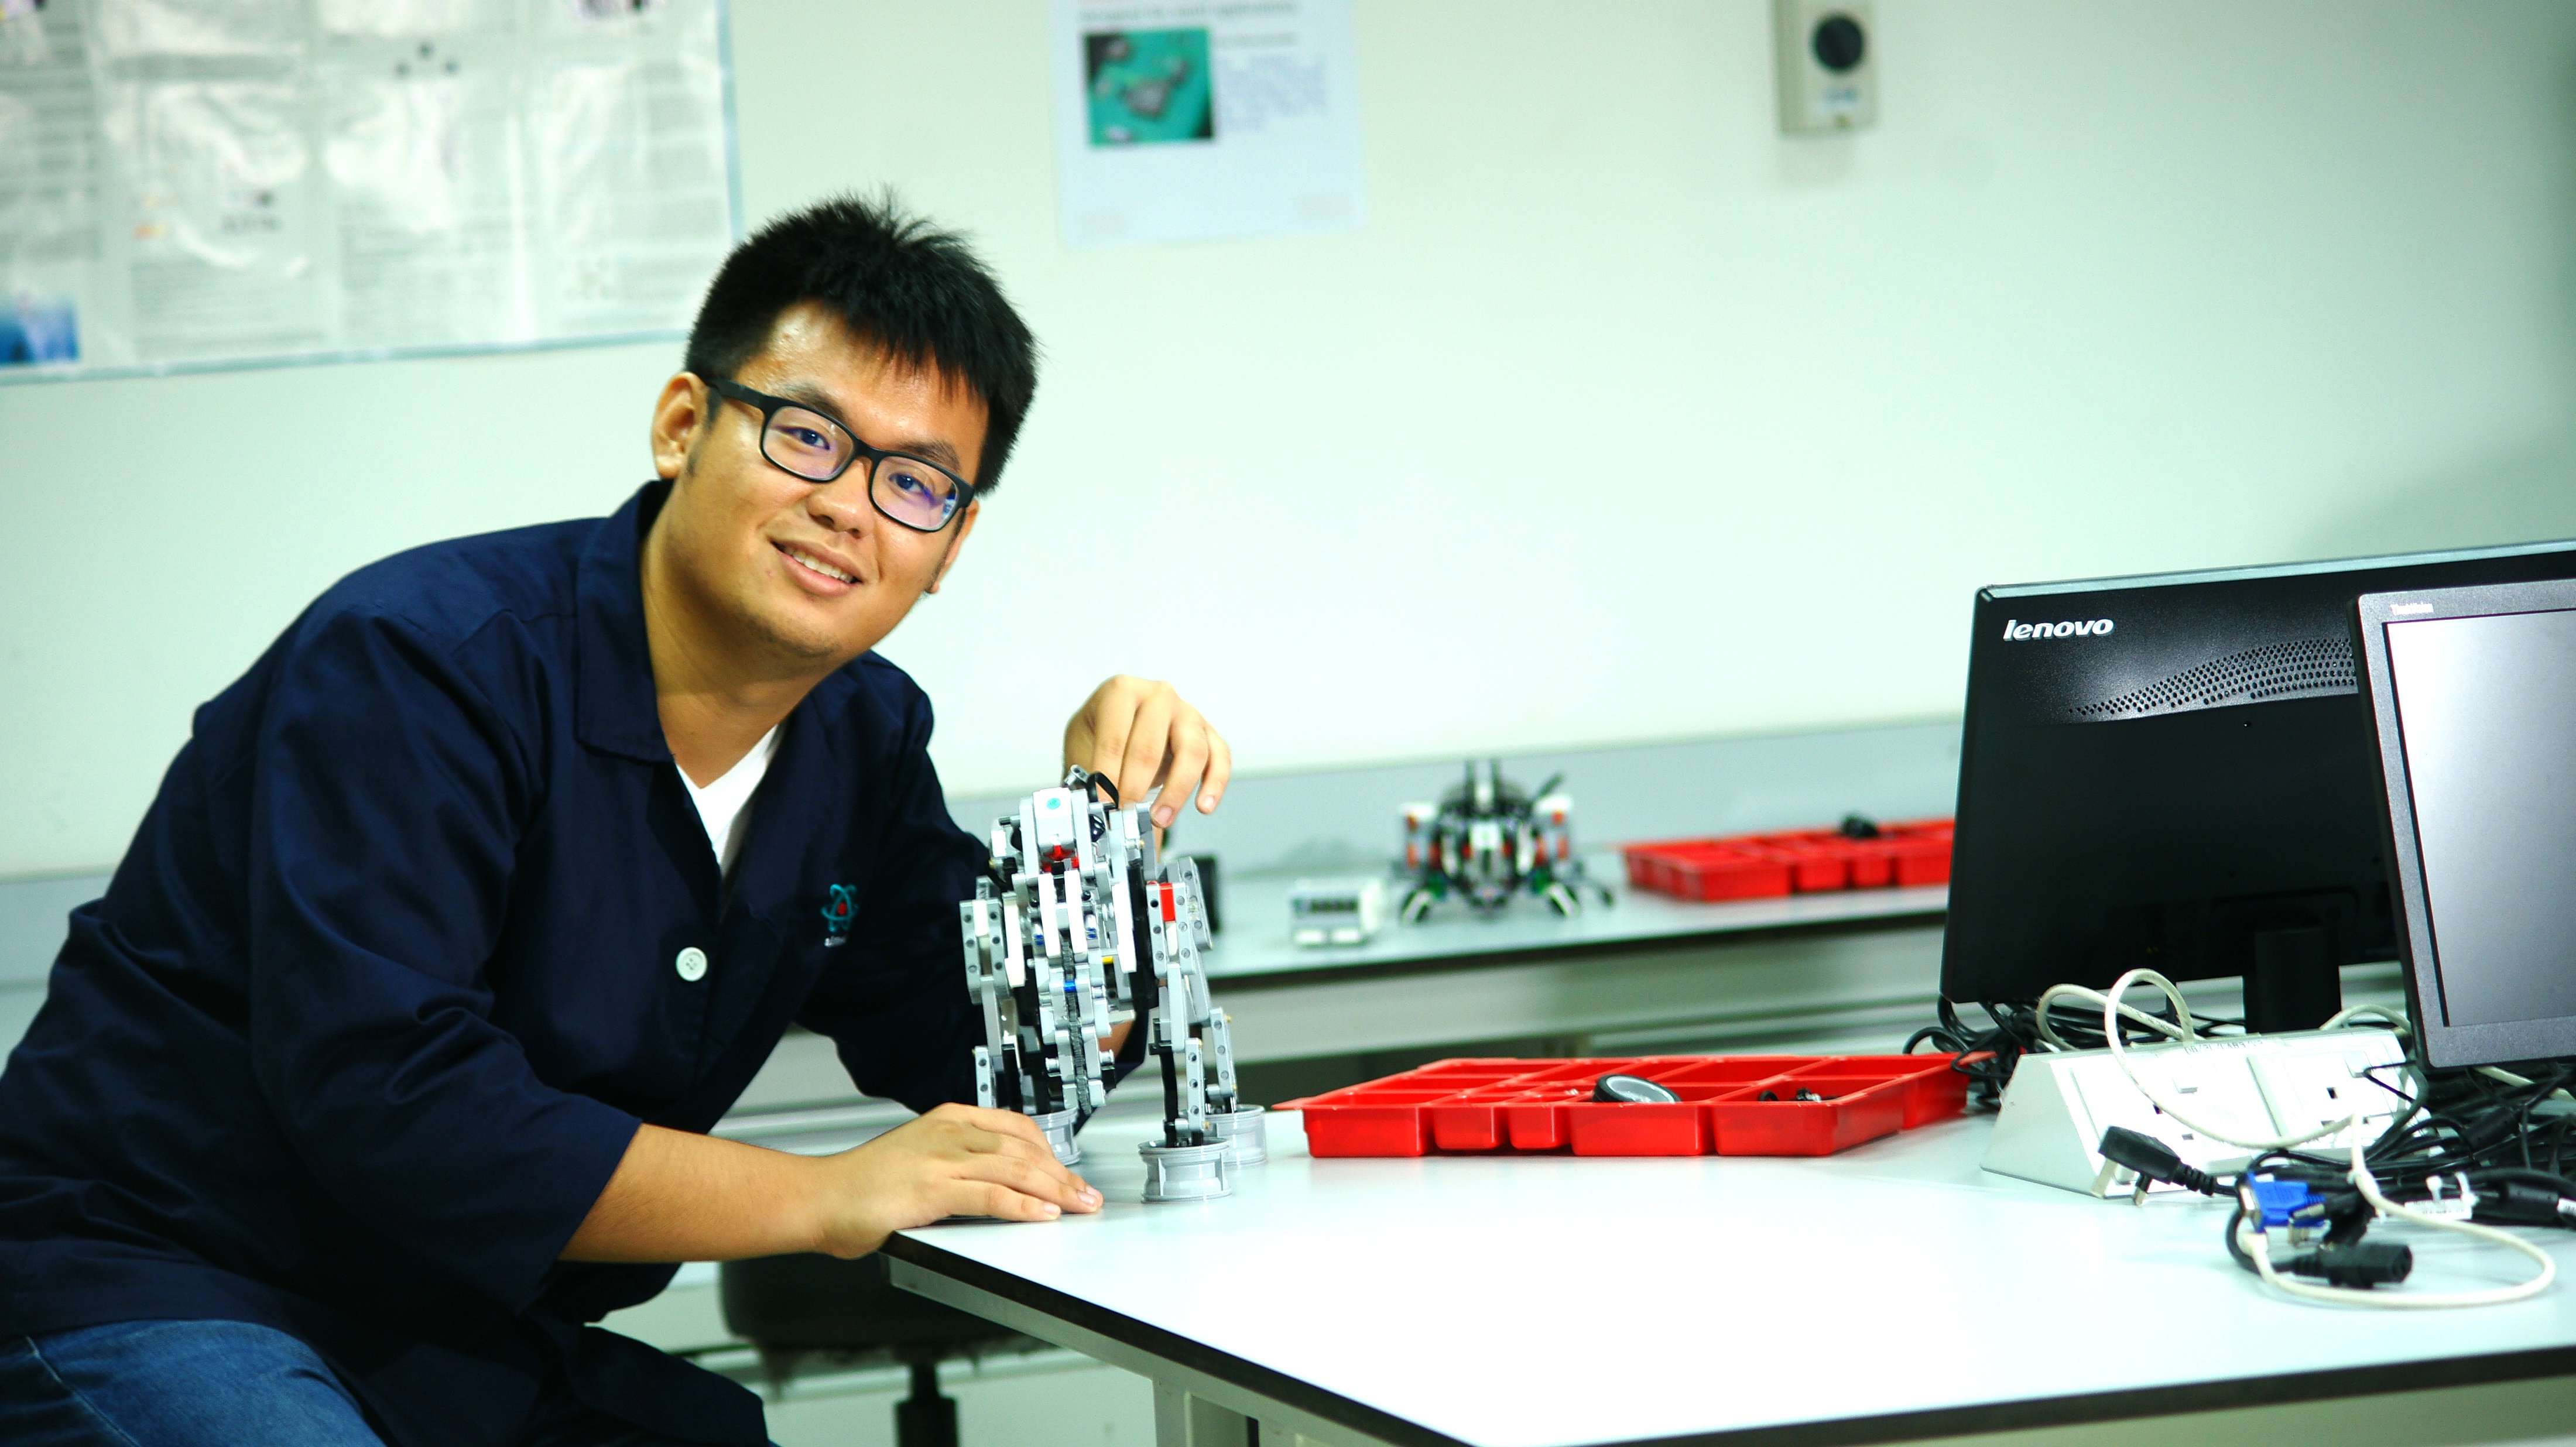 B.Eng (Hons) in Electrical & Electronic Engineering